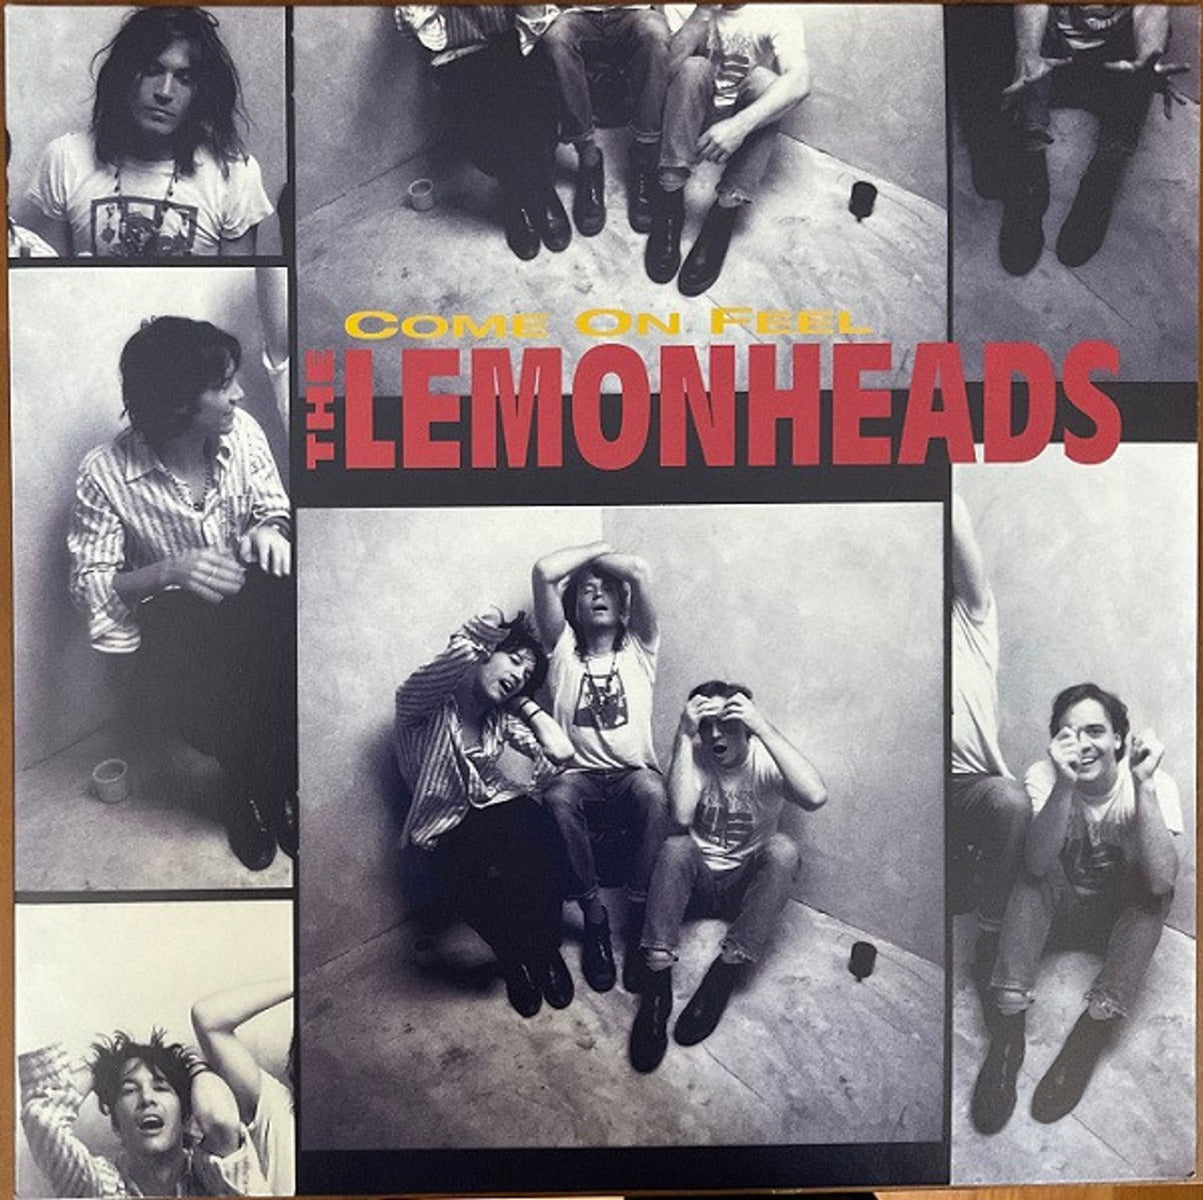 The Lemonheads | Come on Feel: 30th Anniversary Edition (Colored Vinyl, Yellow, Red, Gatefold LP Jacket) (2 Lp's) | Vinyl